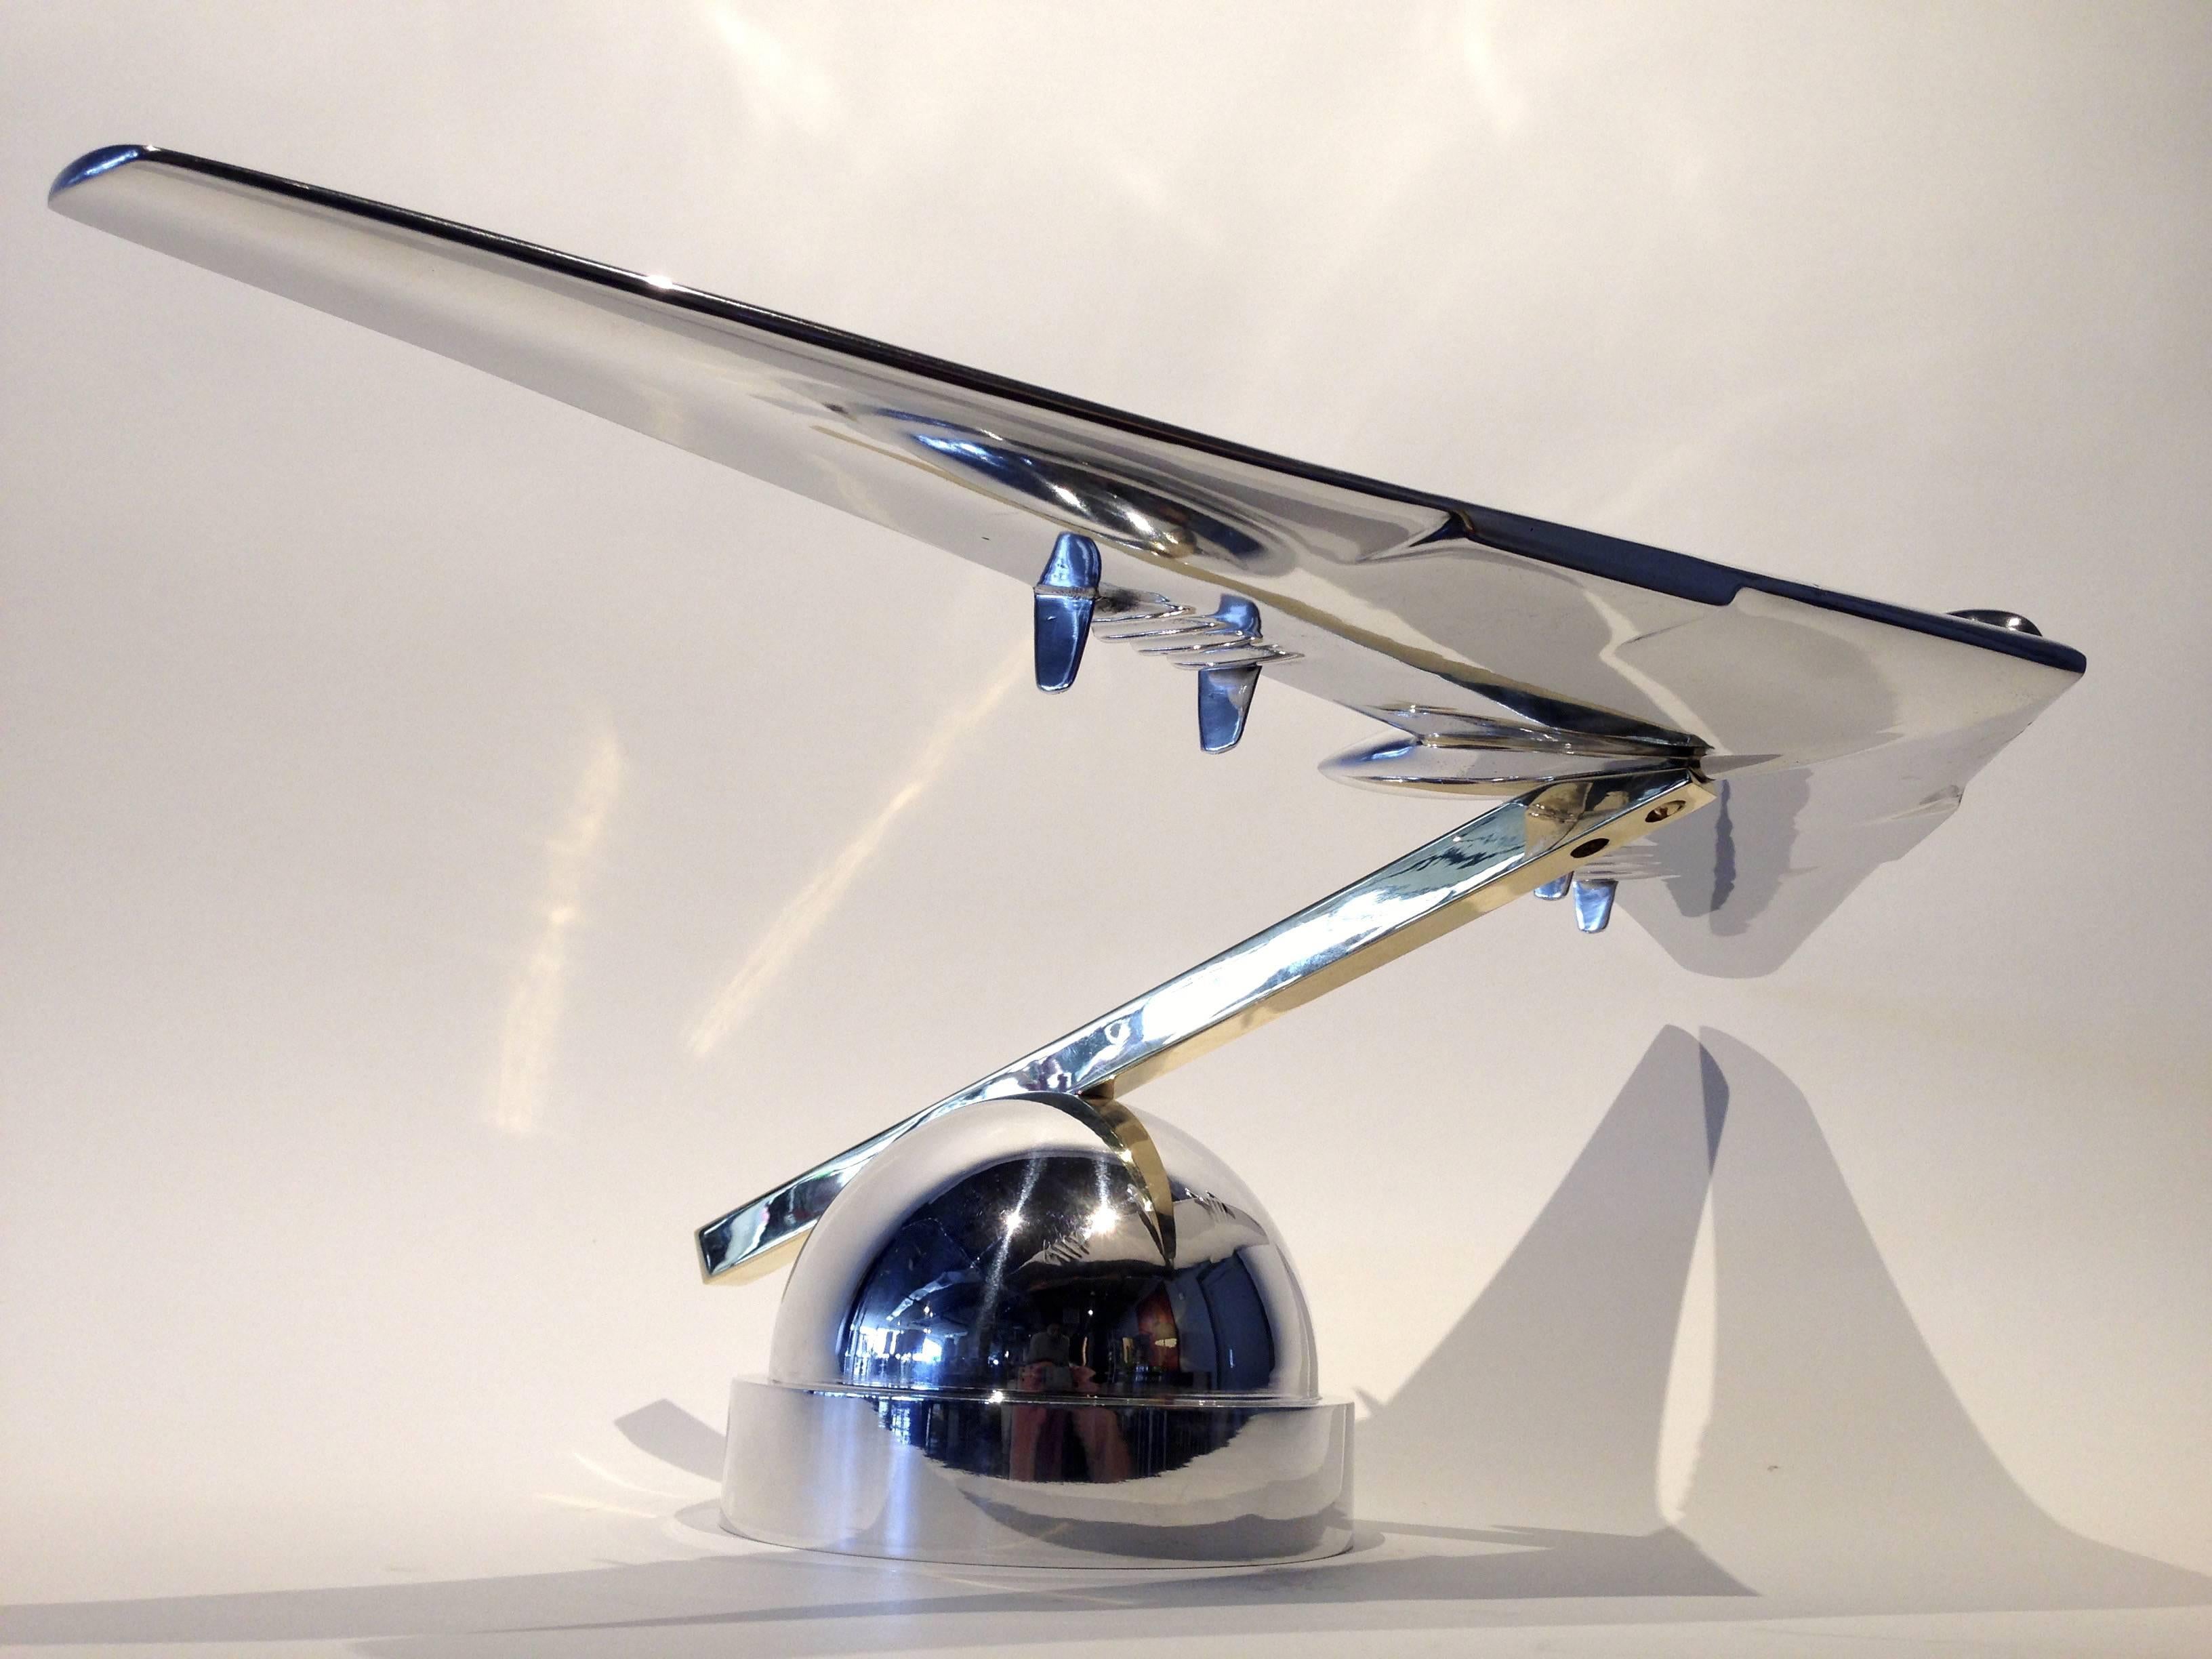 YB-49 Flying Wing Chromed Steel and Brass Sculpture By Phil Miller C. 2015.
This amazingly accurate contemporary sculptural replica is custom built and mounted on a brass square rod and a beautiful matching hemispherical base.
This Flying Wing is